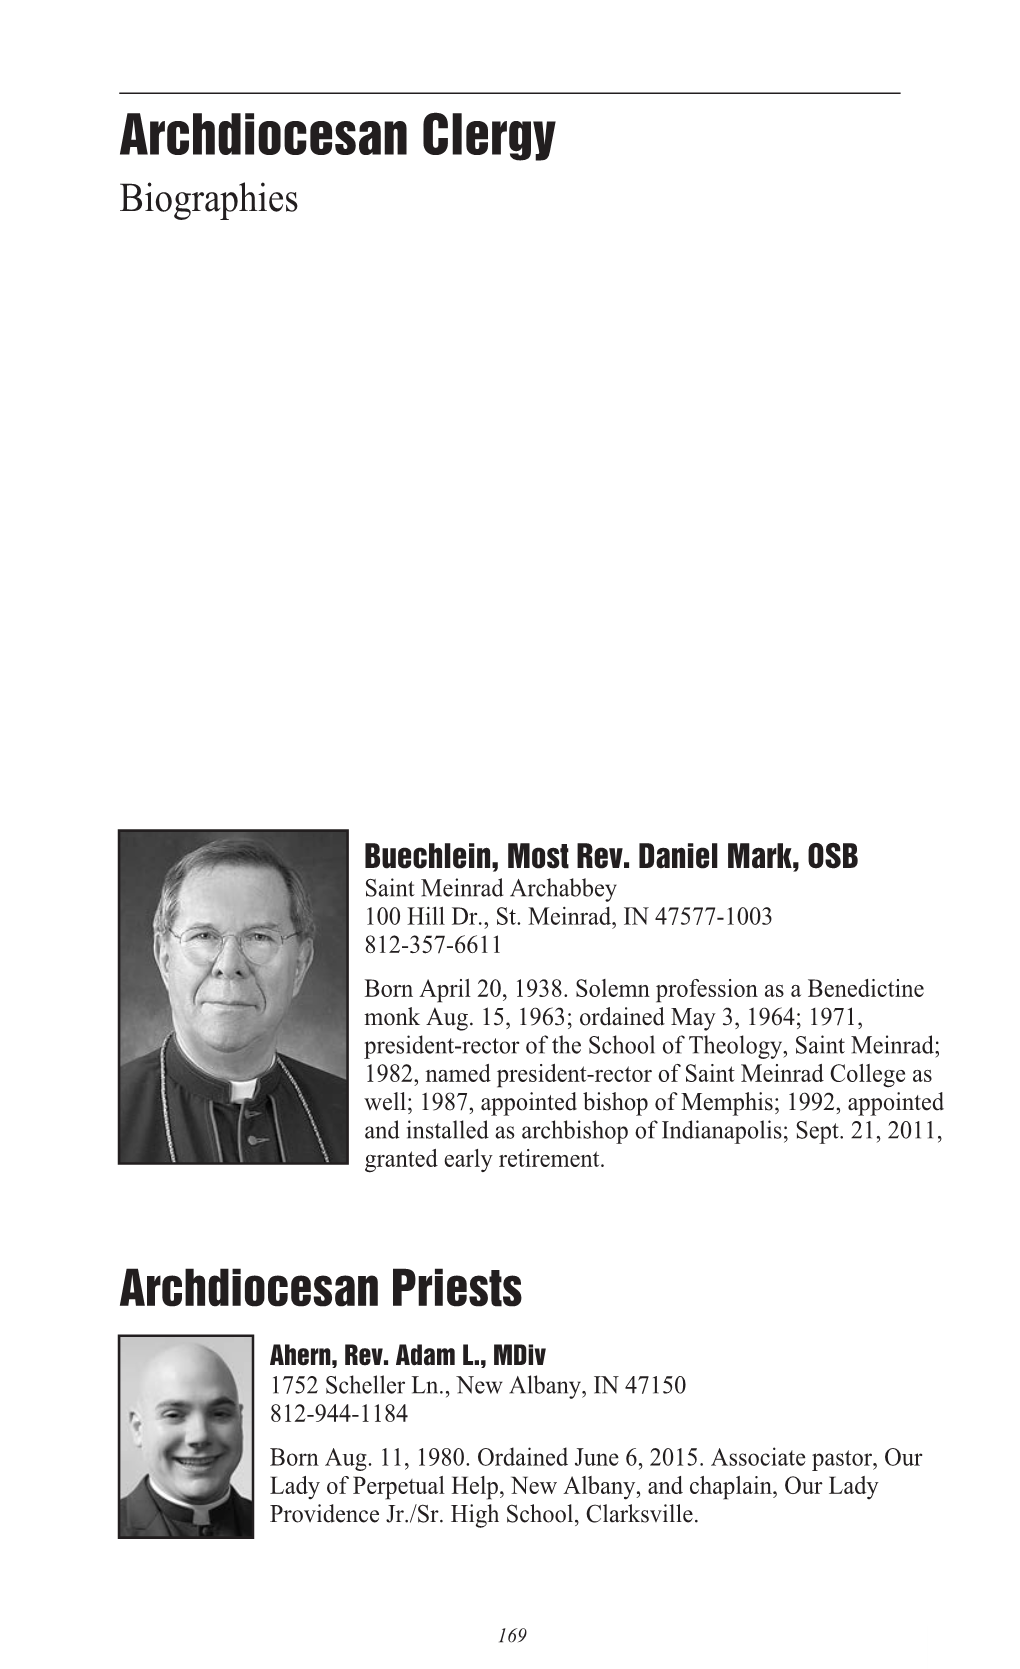 Archdiocesan Clergy Biographies